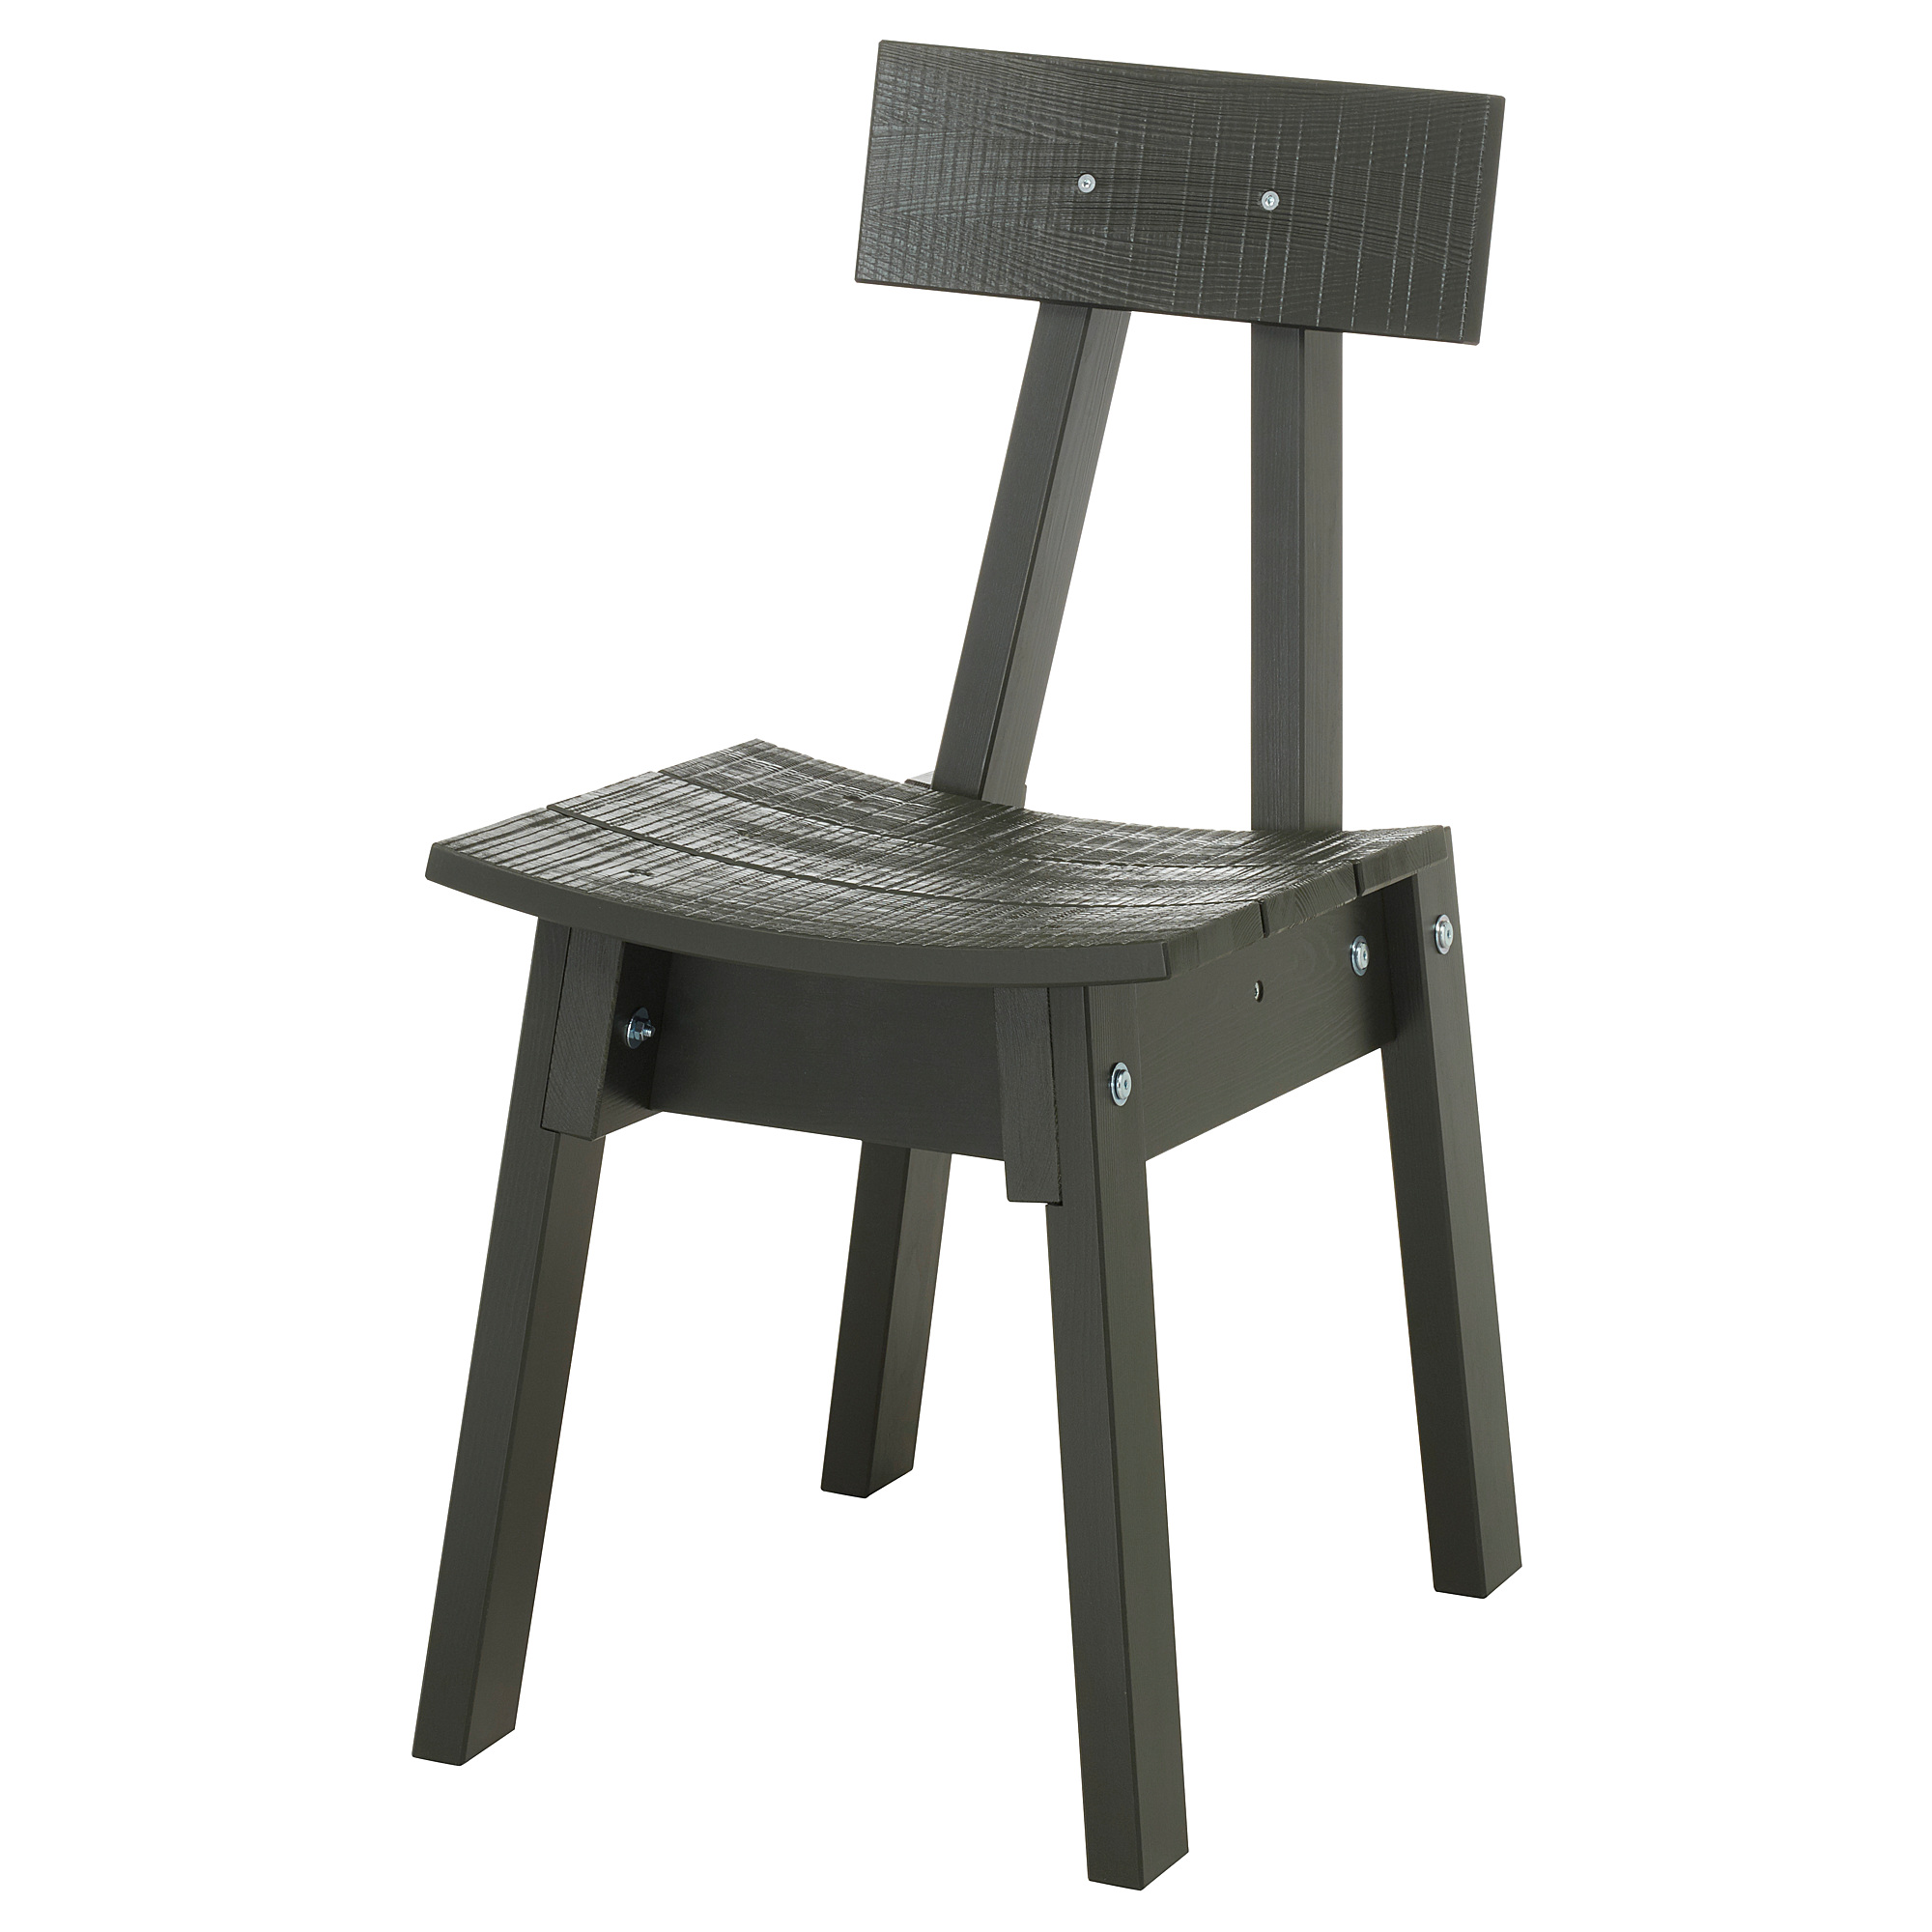 <h2><a href="https://www.ikea.com/ca/fr/catalog/products/50394504/" target="_blank" rel="noopener">Chaise</a></h2>
<p>INDUSTRIELL</p>
<p>79,99 $</p>
